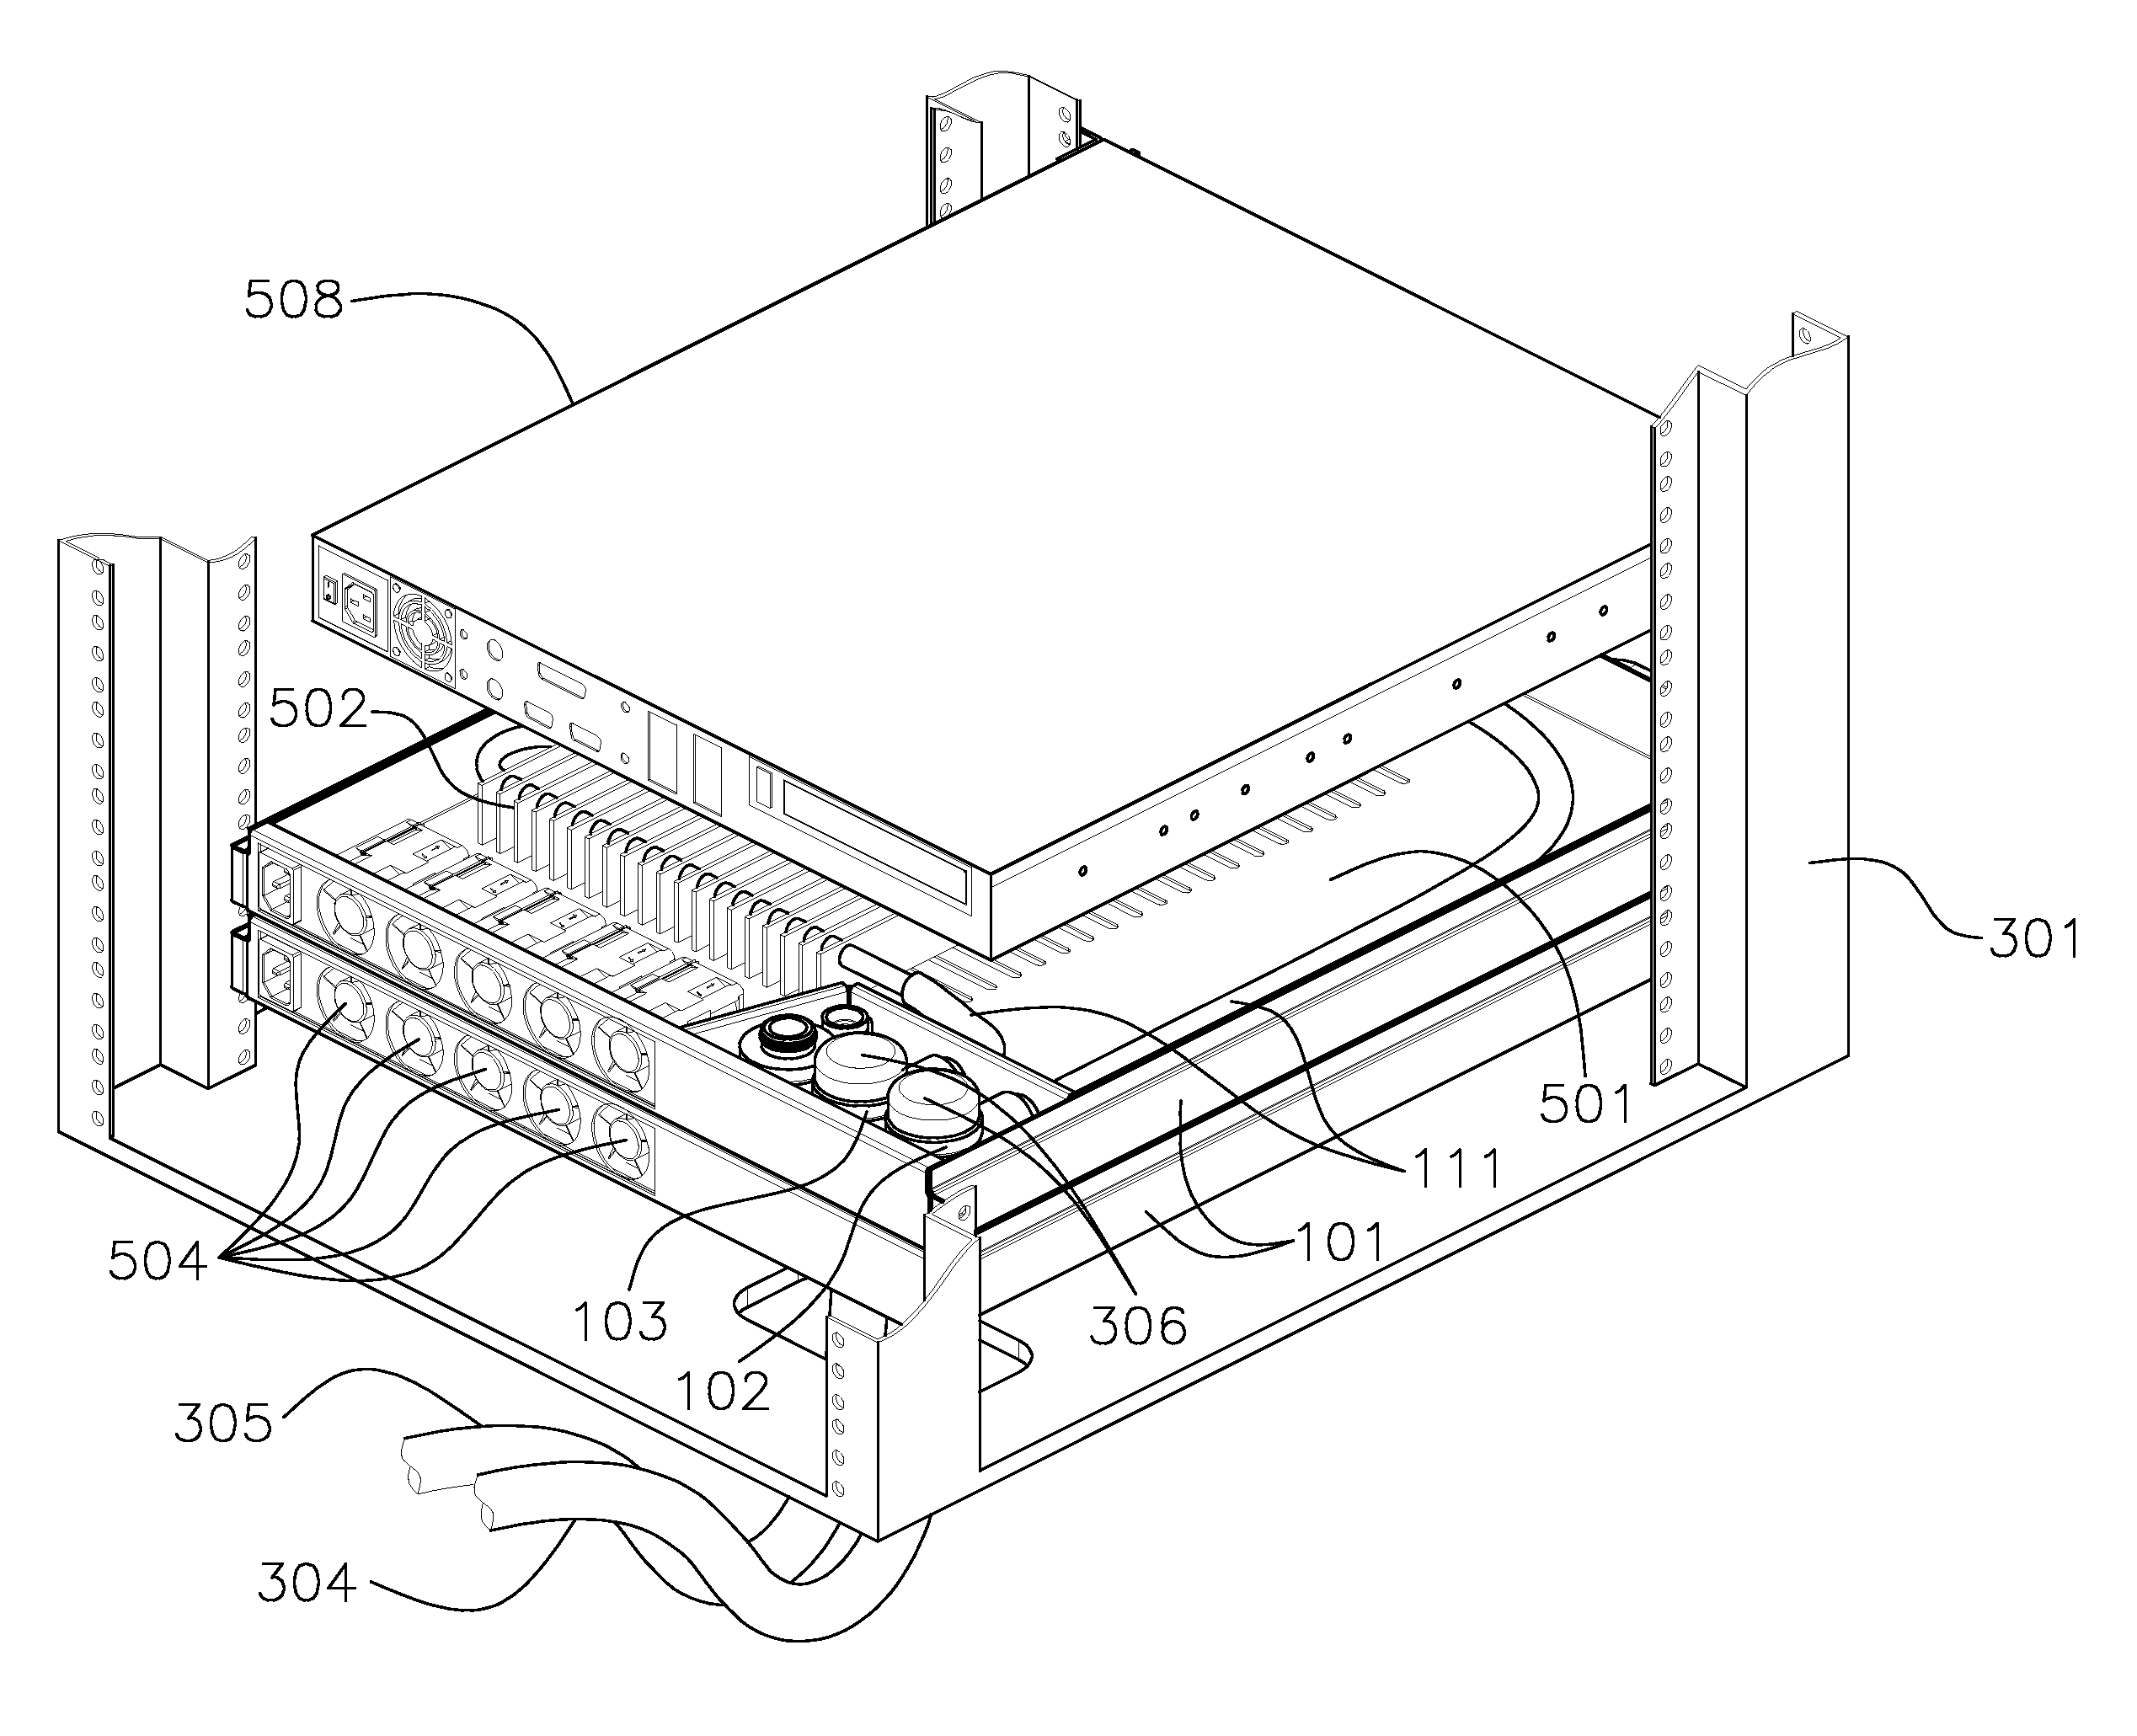 System and method for flowing fluids through electronic chassis modules